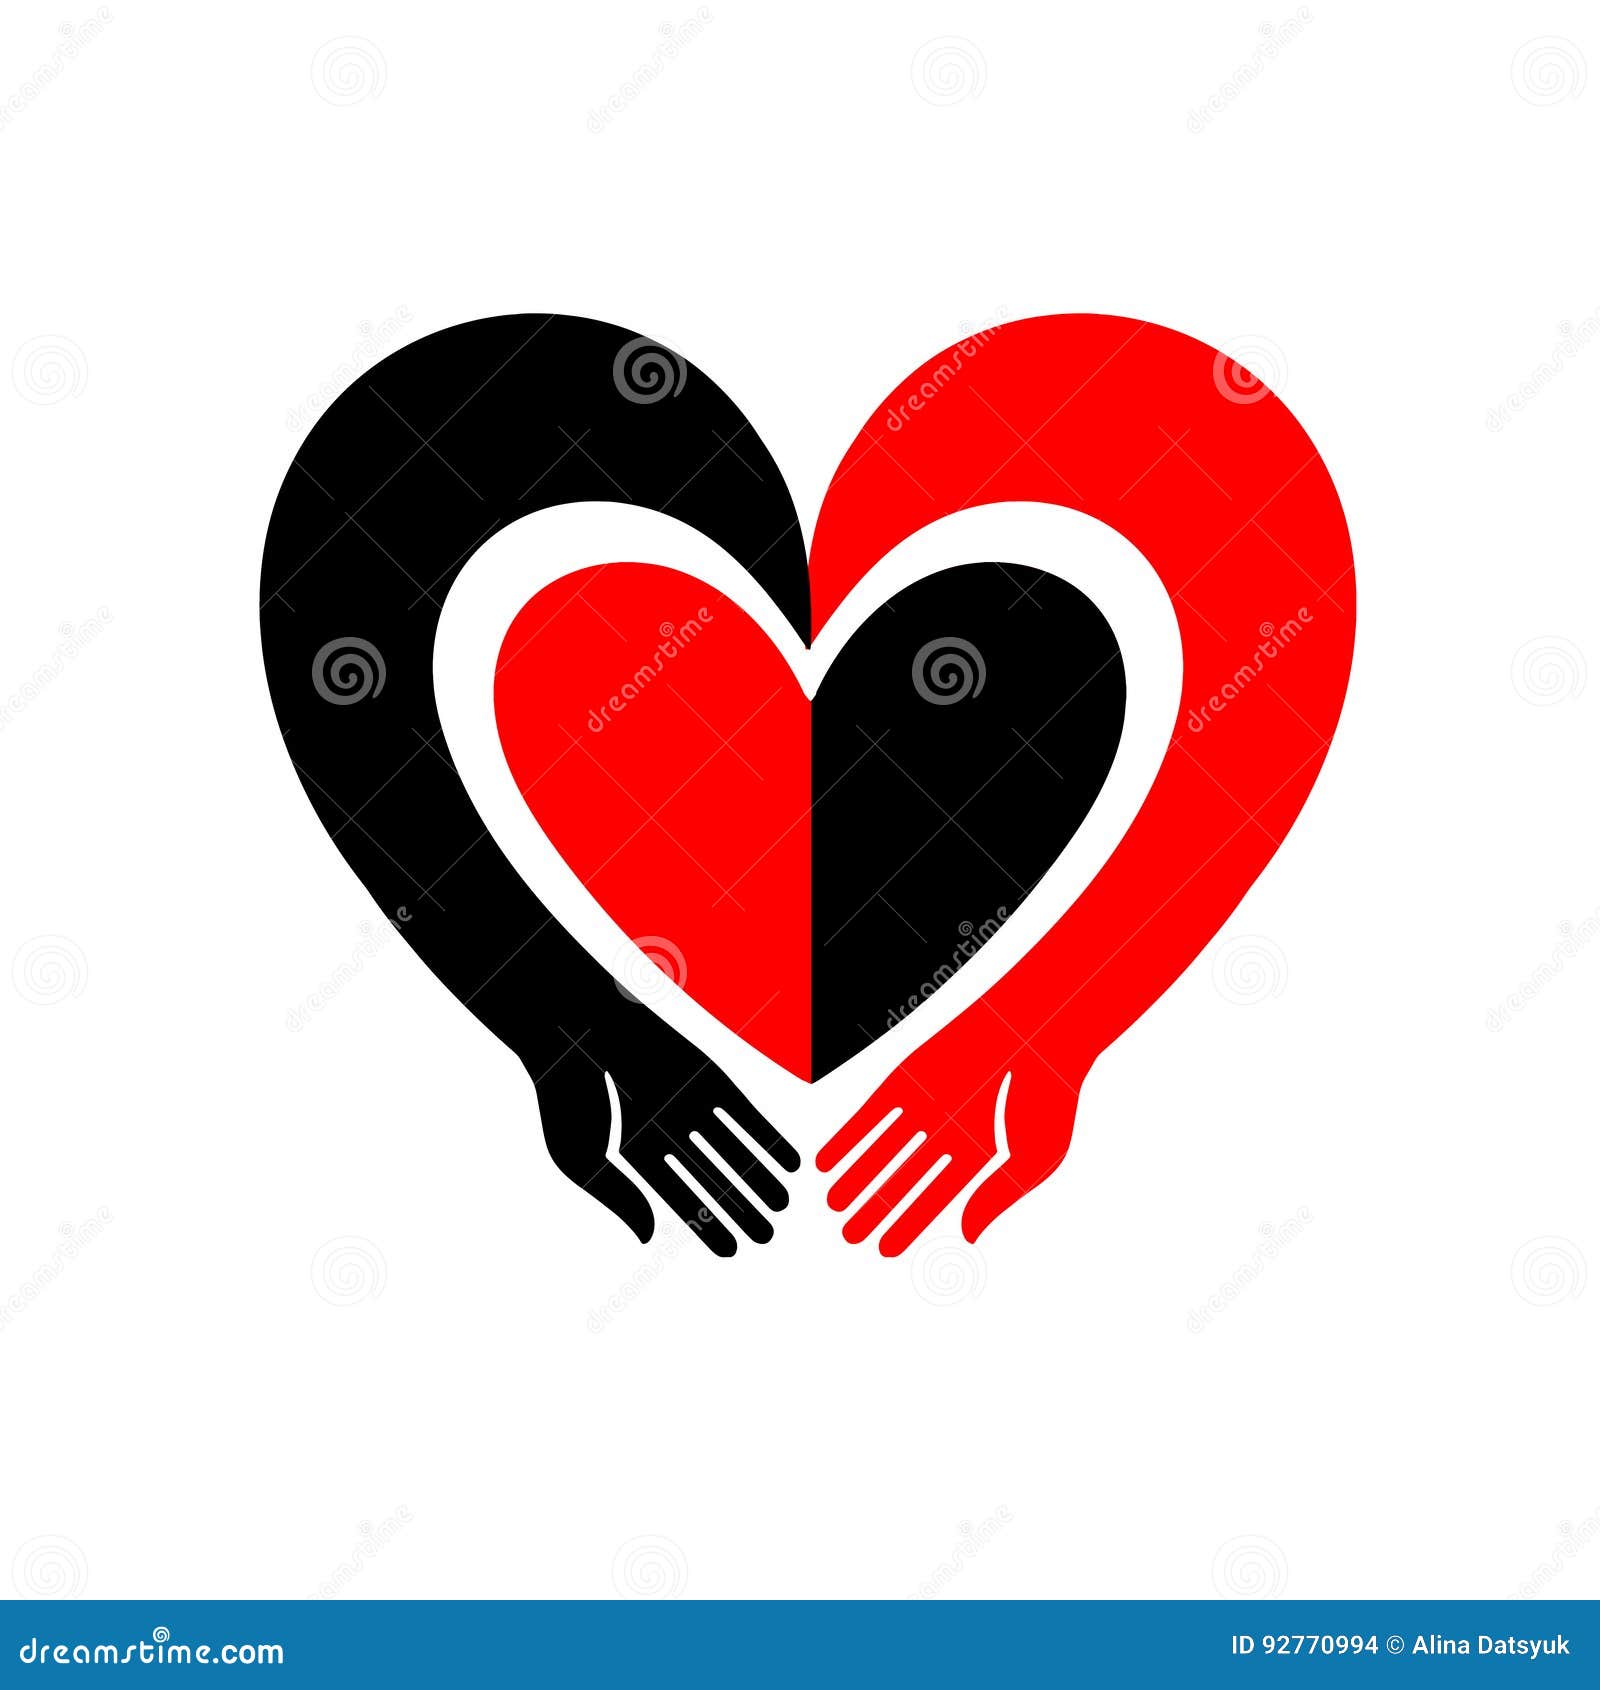 Hands Embracing a Heart. the Original Icon with Black and Red Design ...